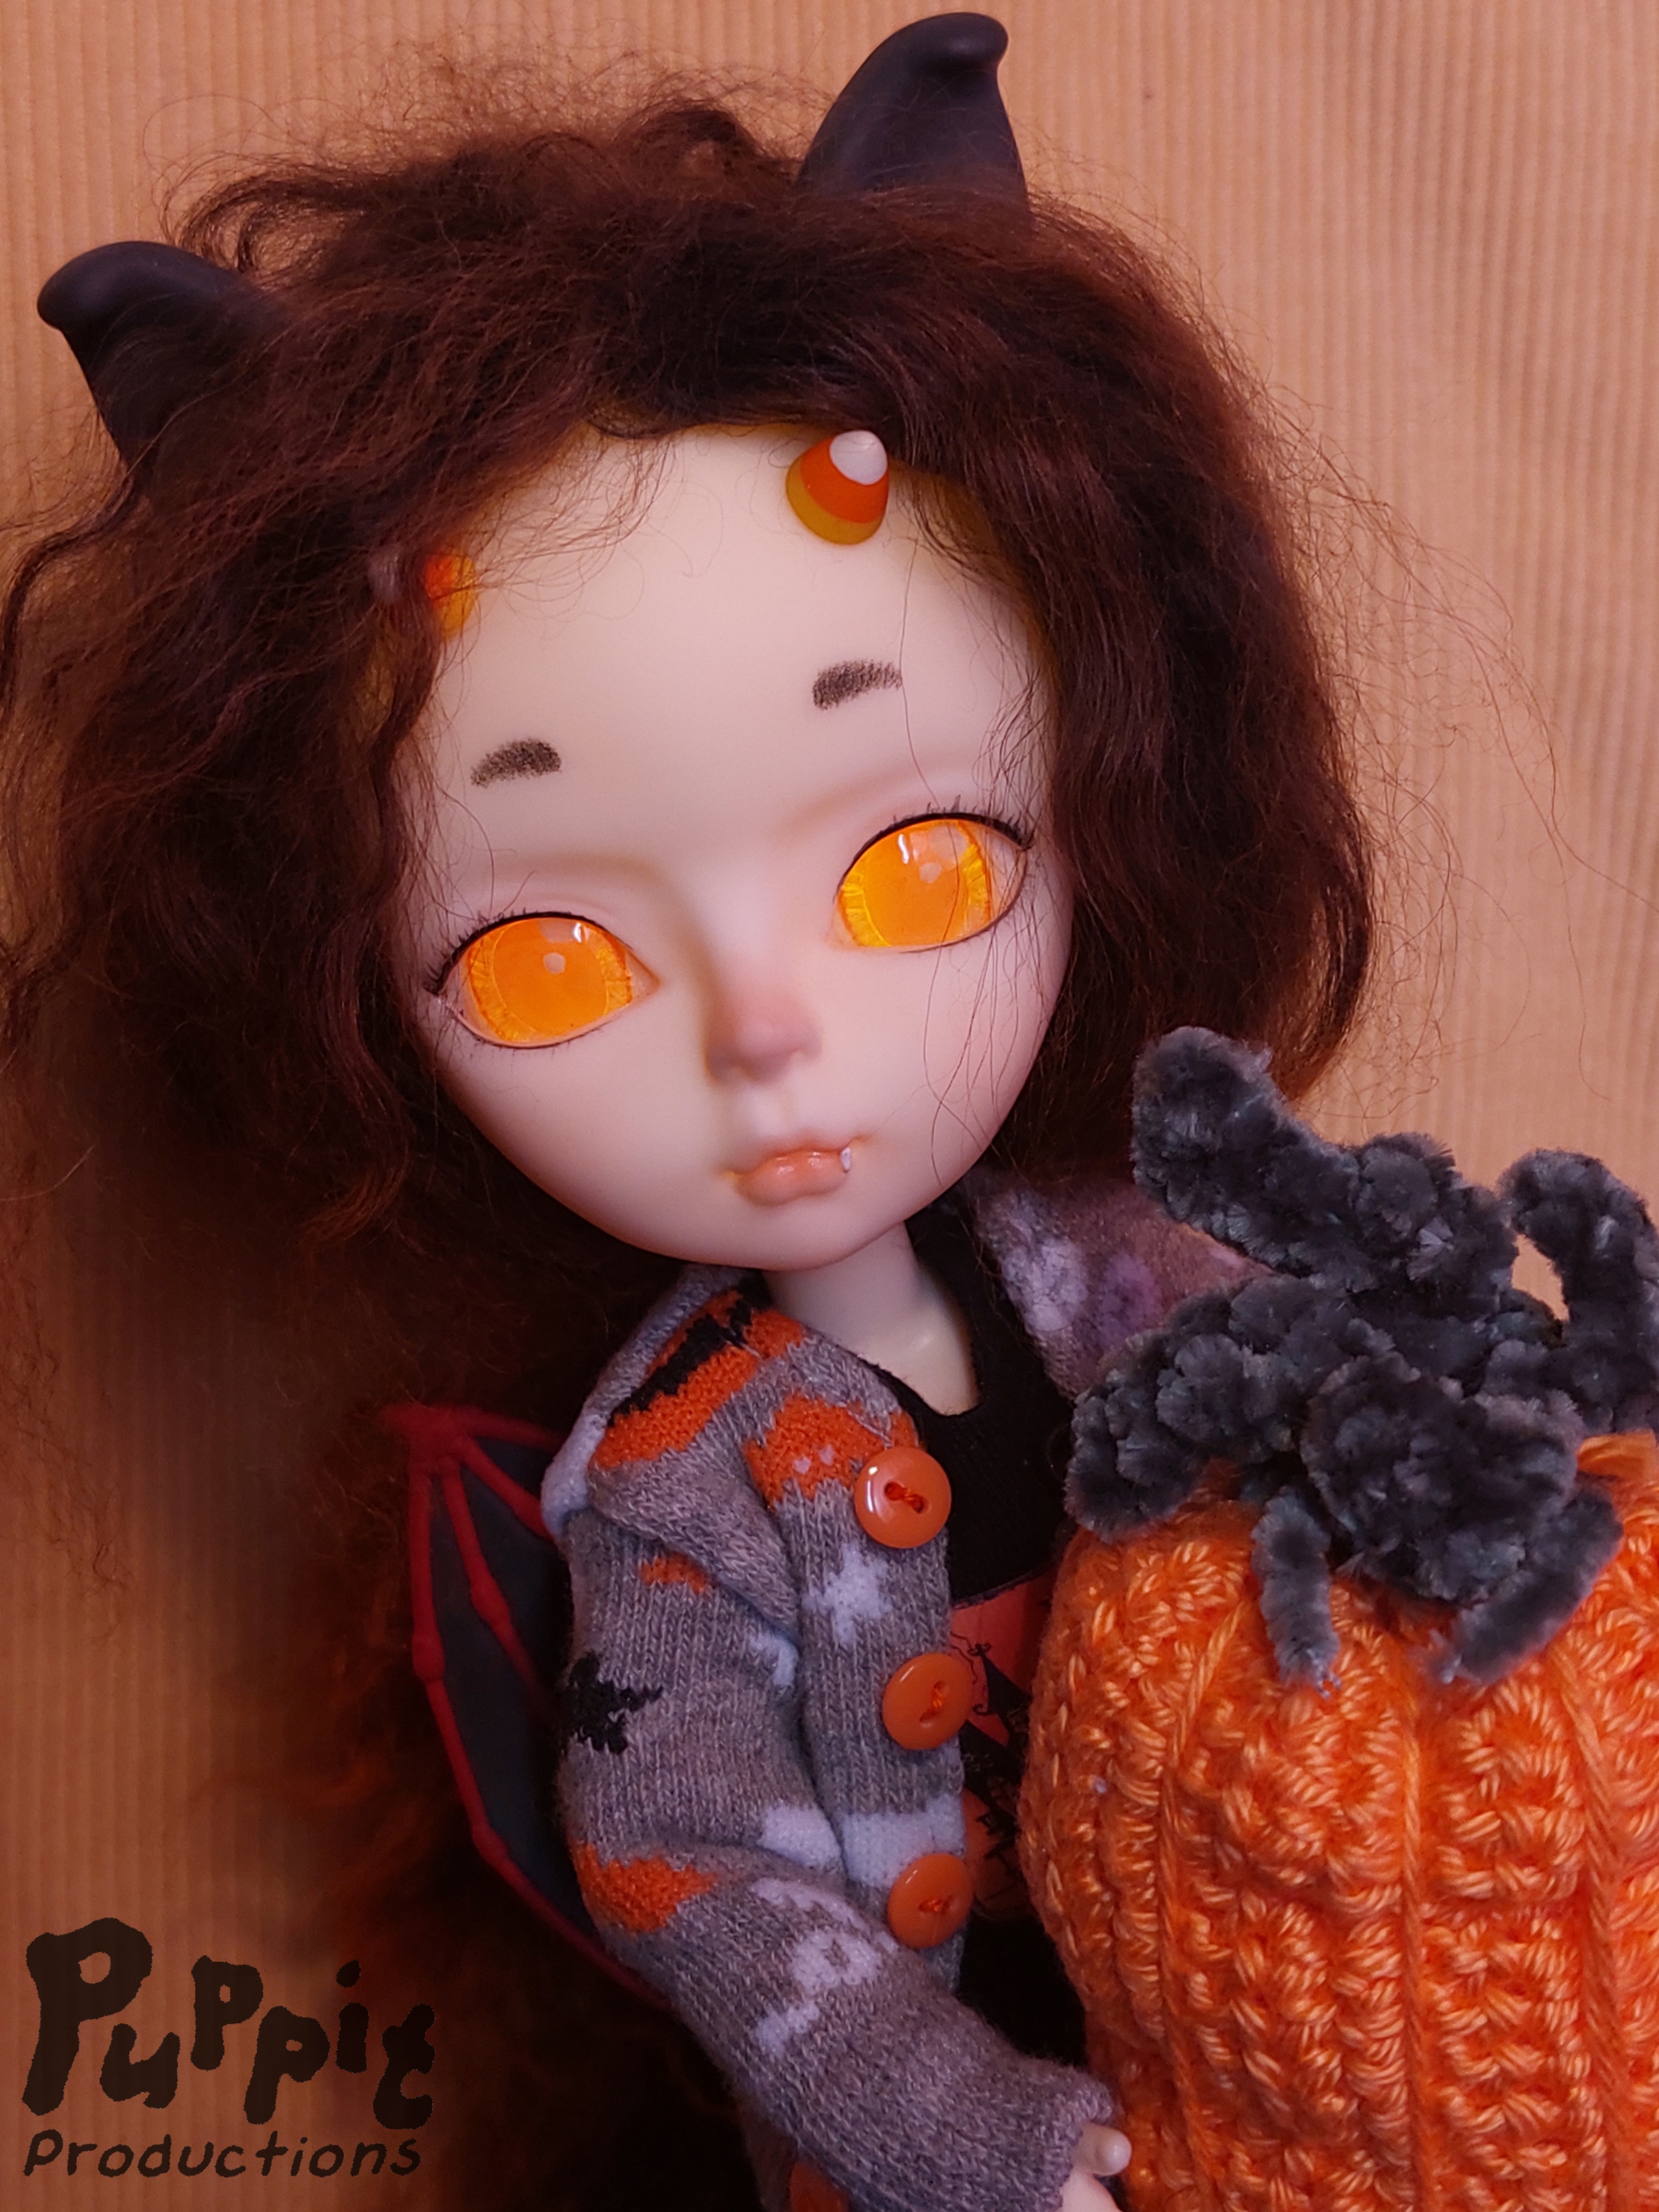 A photograph of a Hujoo Yomi doll with bat ears, candy corn horns, wild wavy black & red hair and glowing orange eyes, wearing a grey sweater with black and orange bats, holding a crocheted pumpkin.